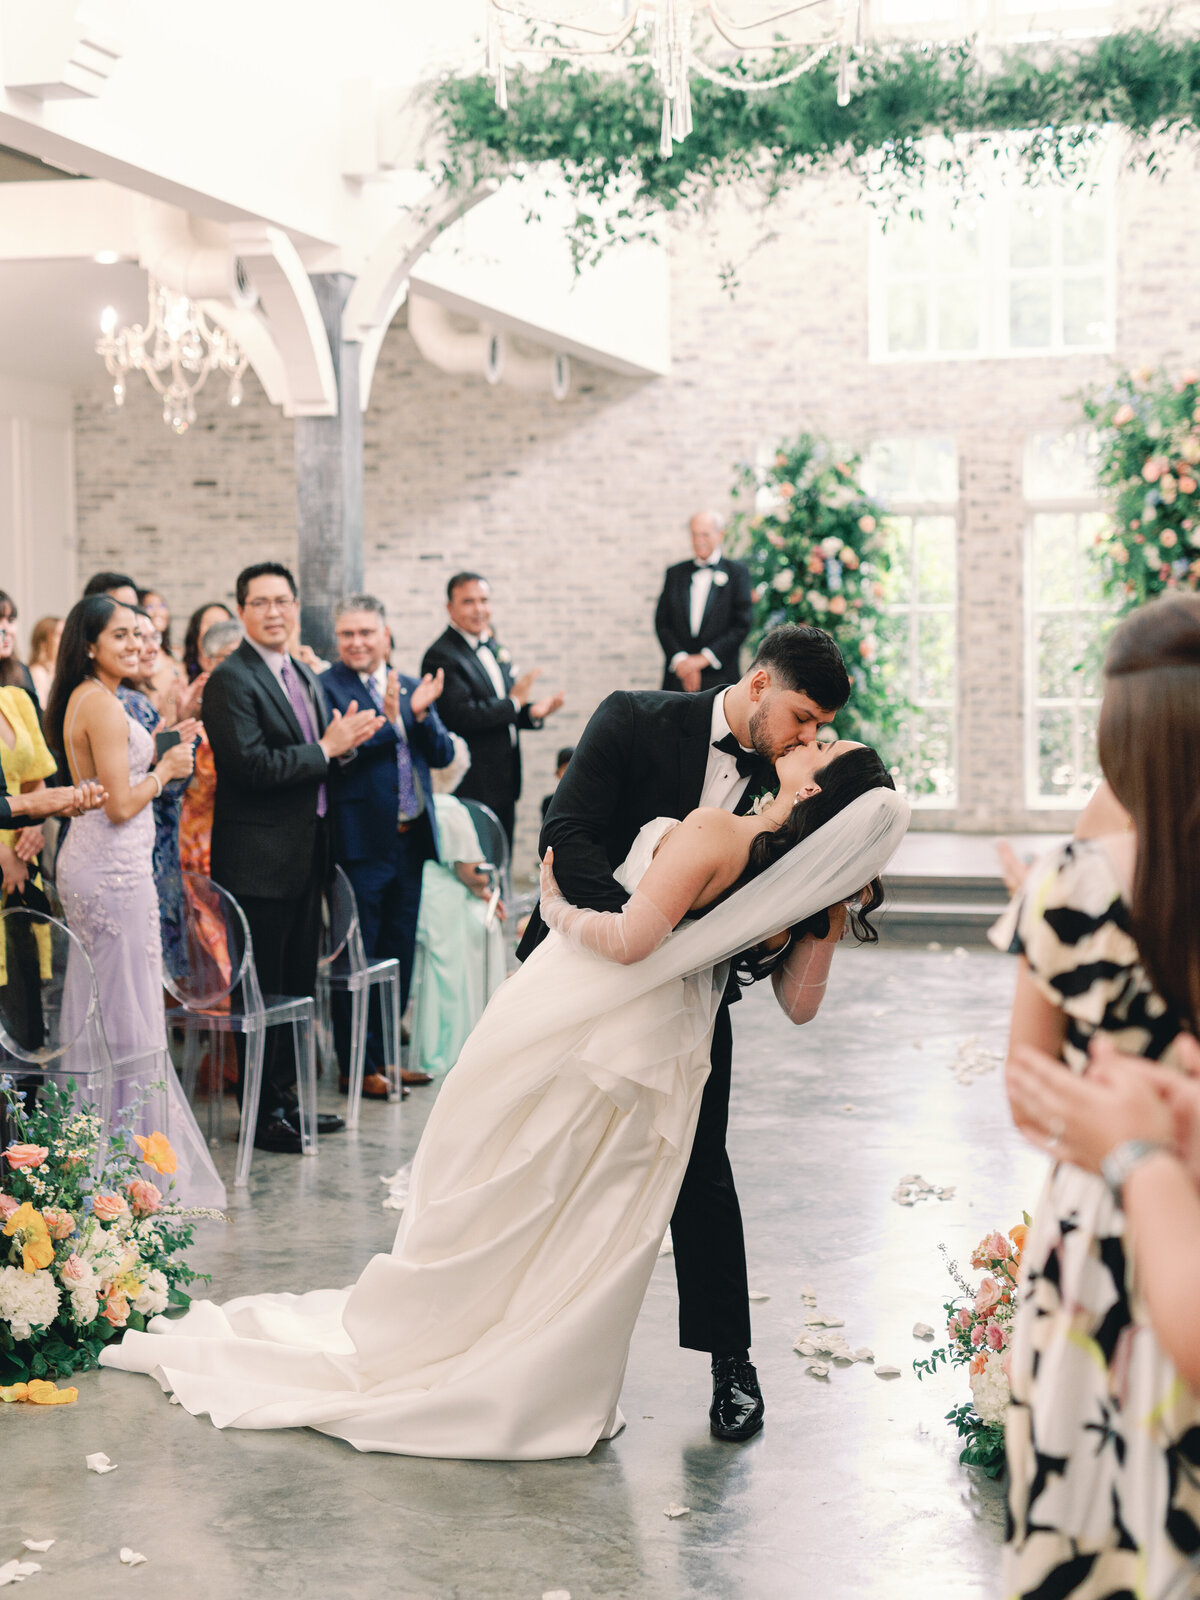 elegant bride with gloves and modern dress with bright and colorful garden party florals and groom in black suit walking down aisle during ceremony